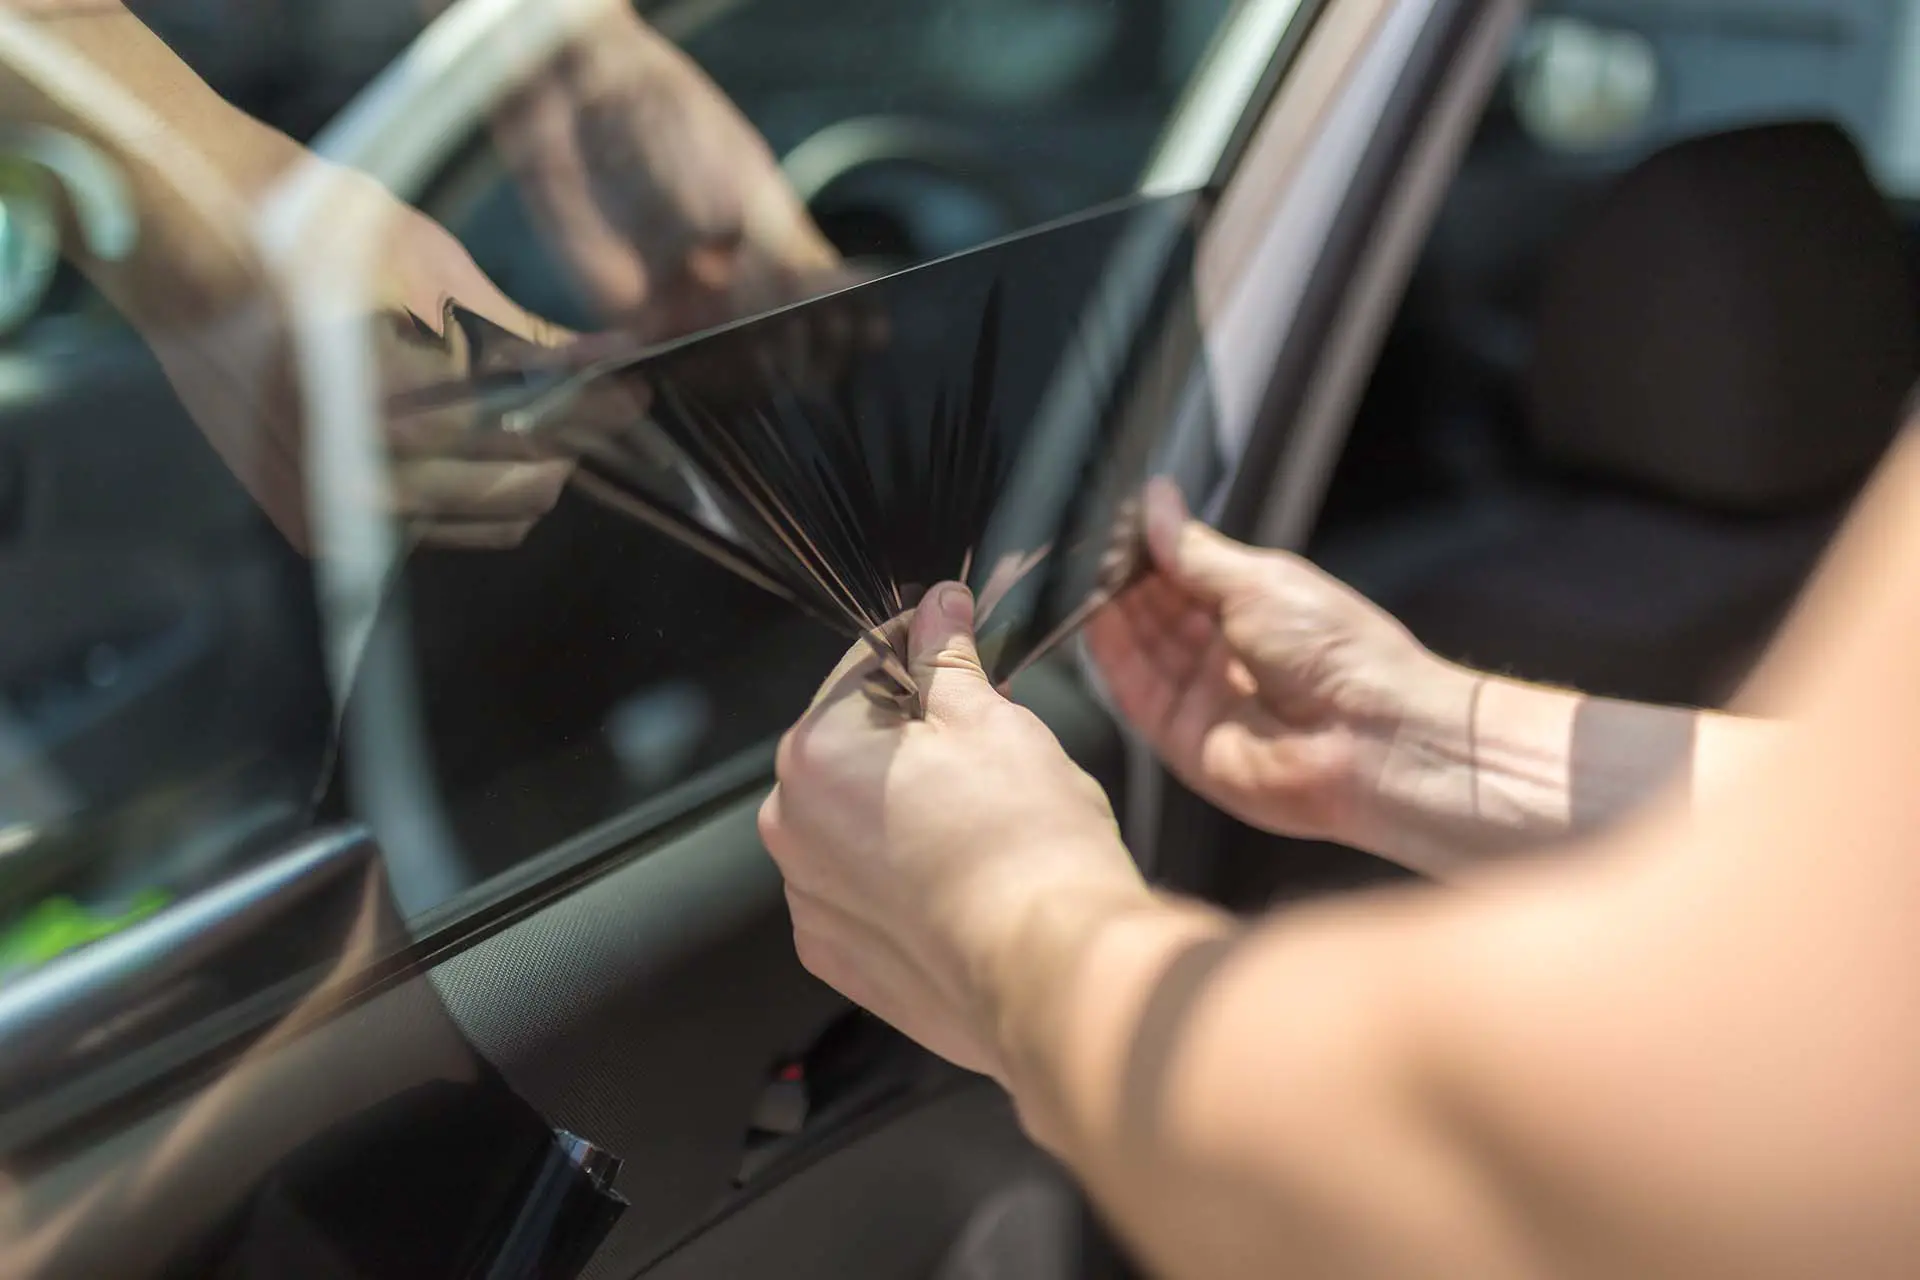 Process of removing sunlight protective car window glass foil.